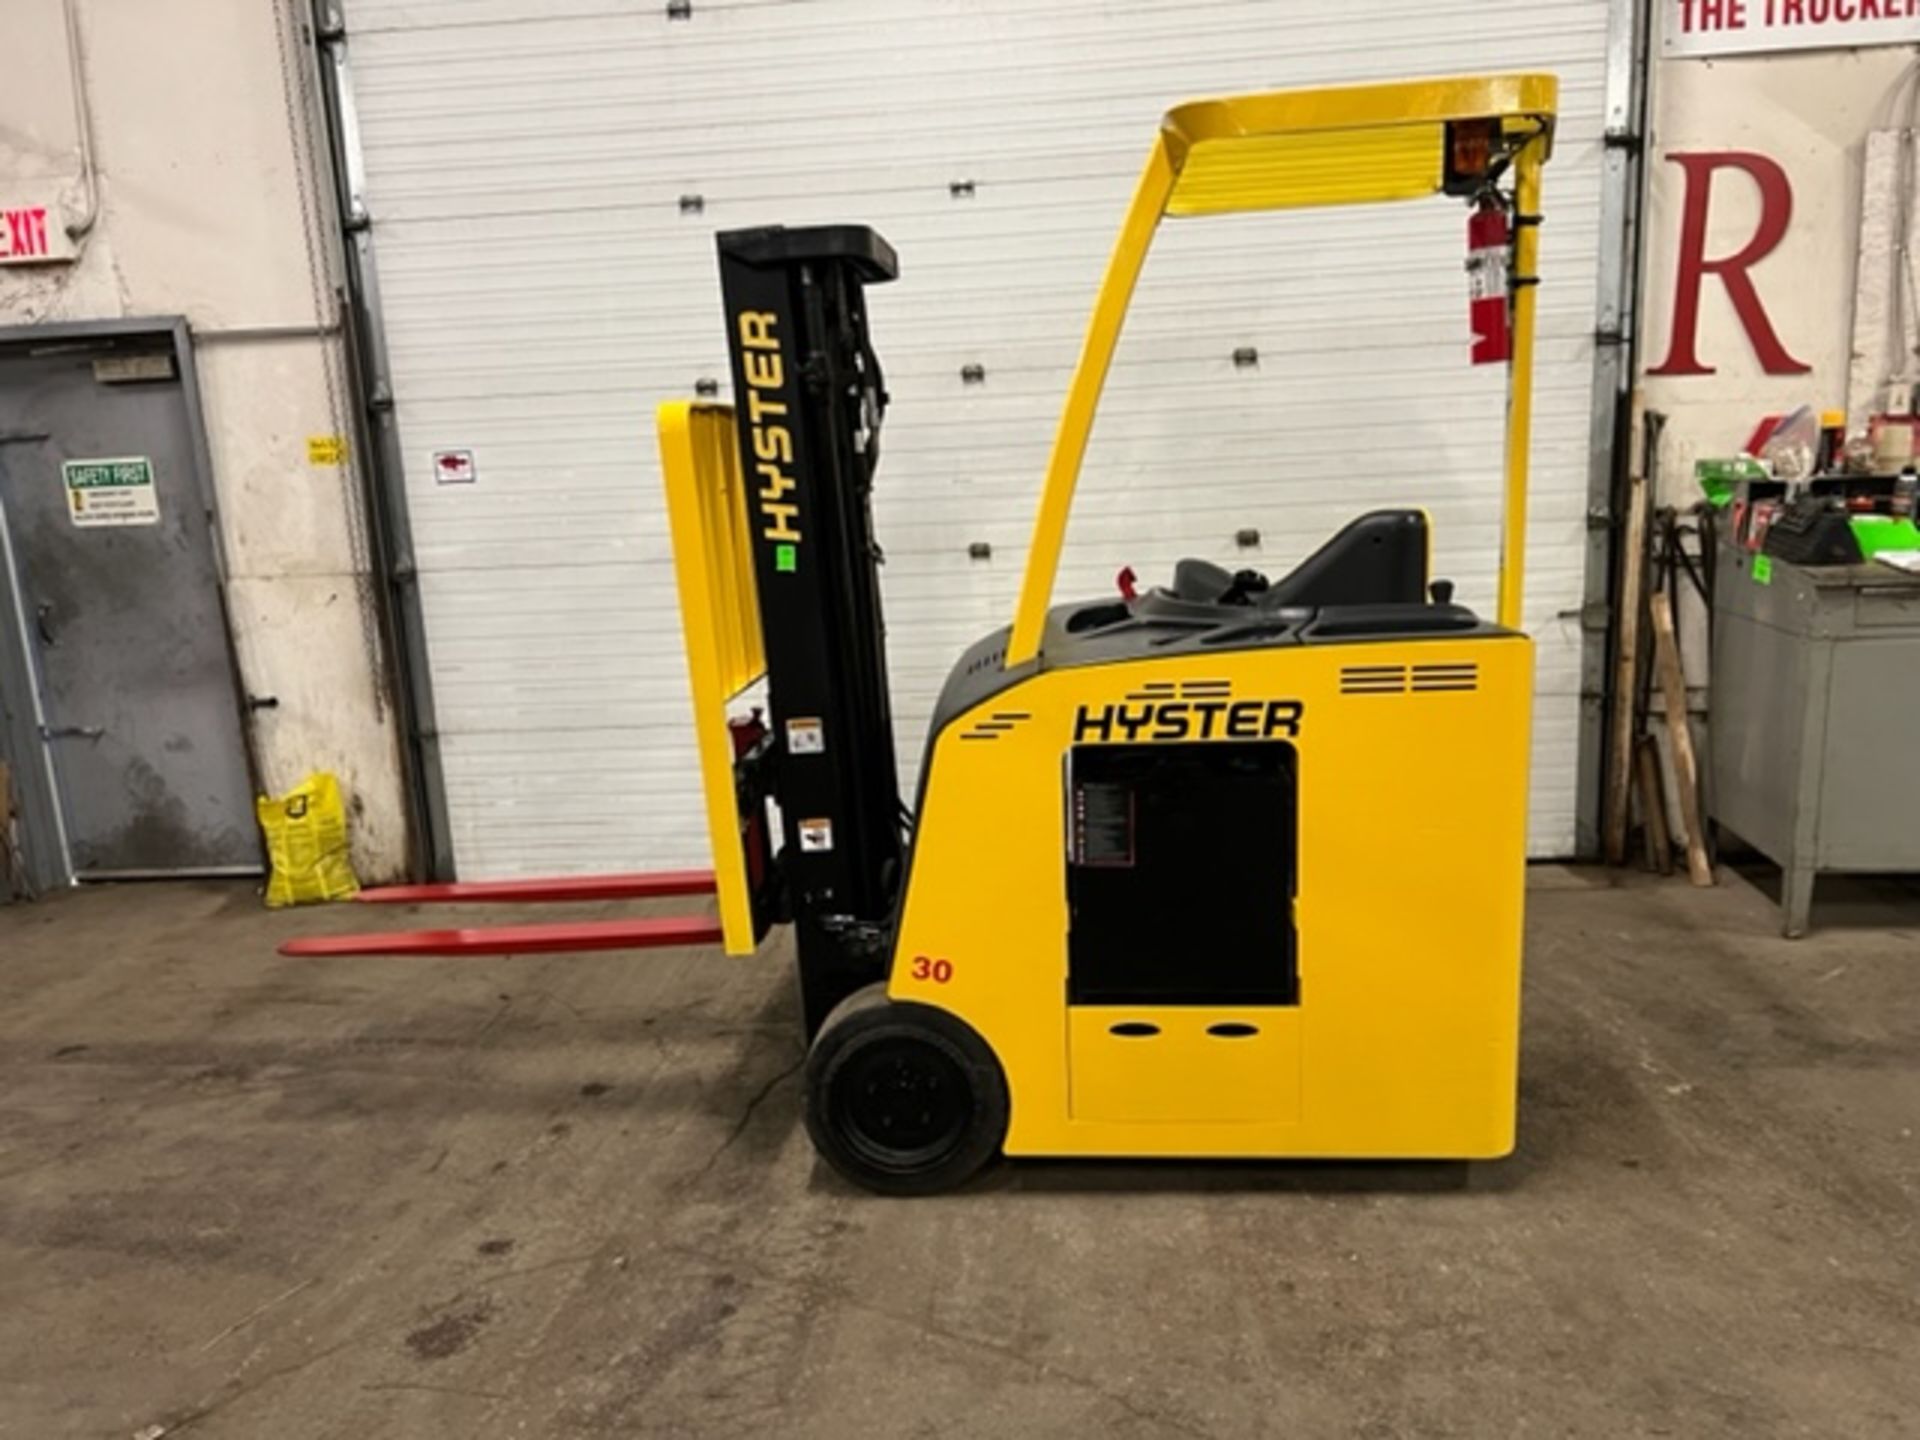 FREE CUSTOMS - Nice 2012 Hyster 3,000lbs Capacity Counter Balance Forklift Stand Up Electric with